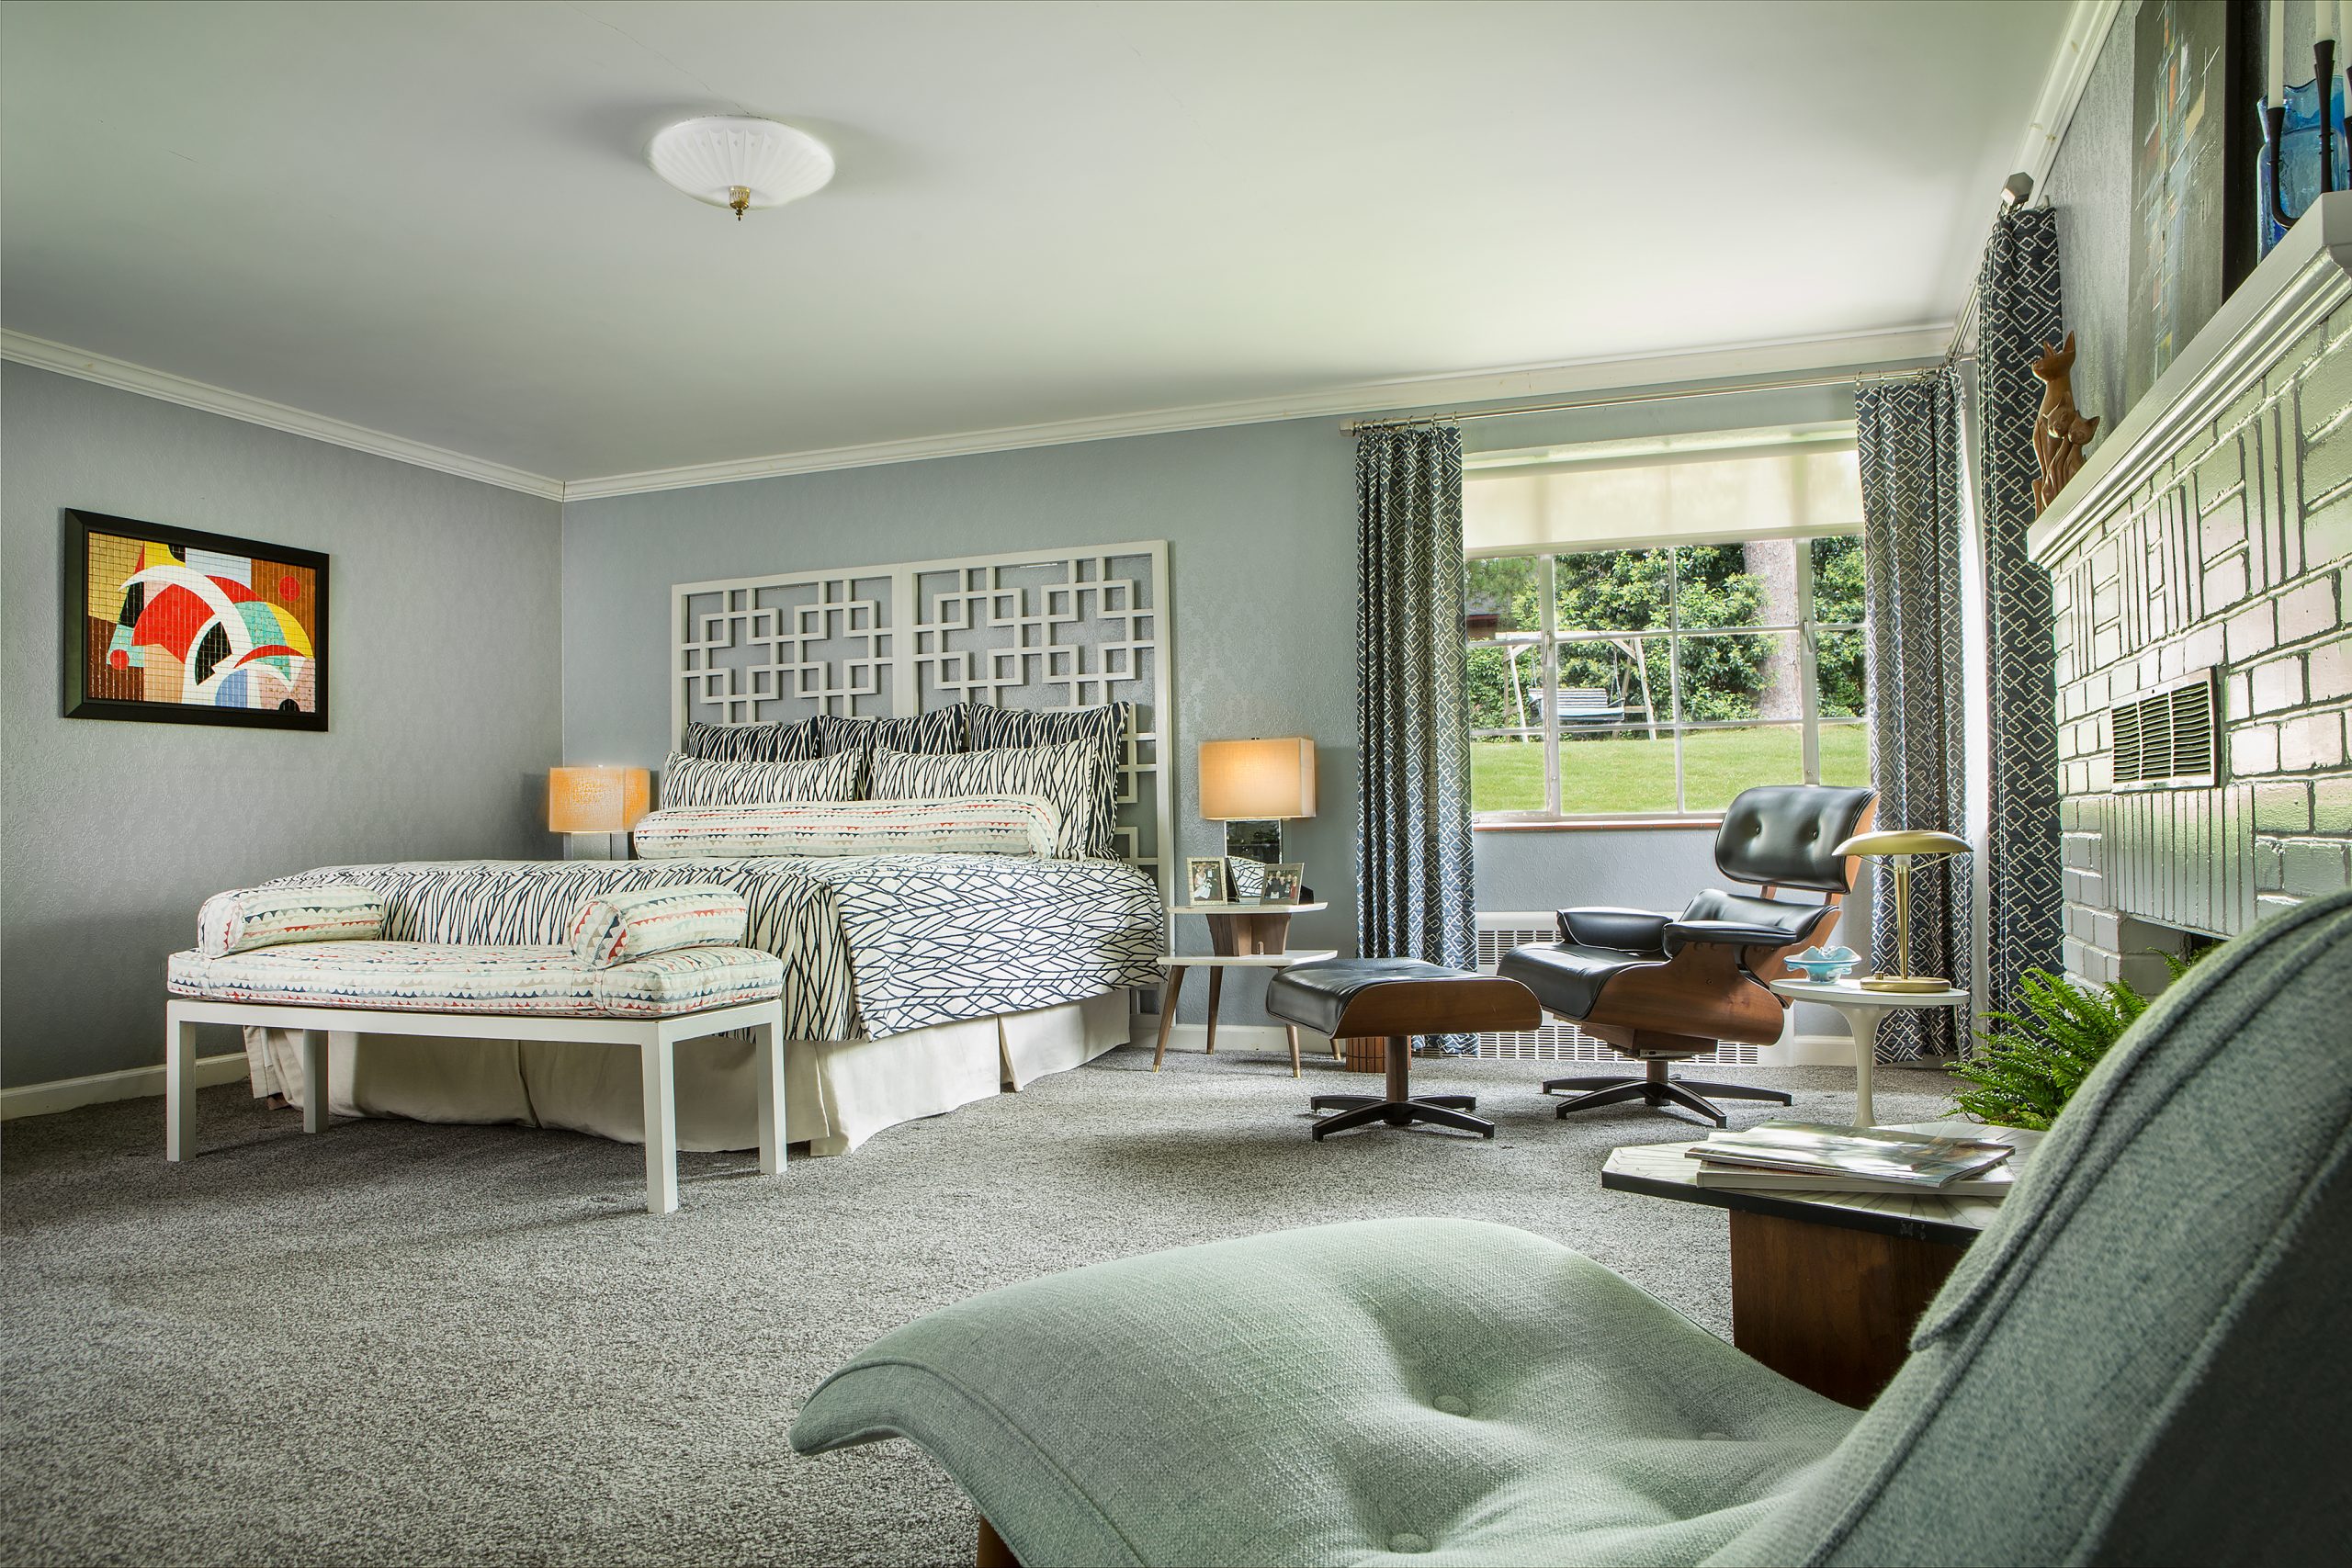 The master bedroom is highlighted by a wall mosaic made by John’s father, John Scullion, Sr., in 1965. A gifted artist and master woodworker, he was a major influence on John’s love for midcentury modern.